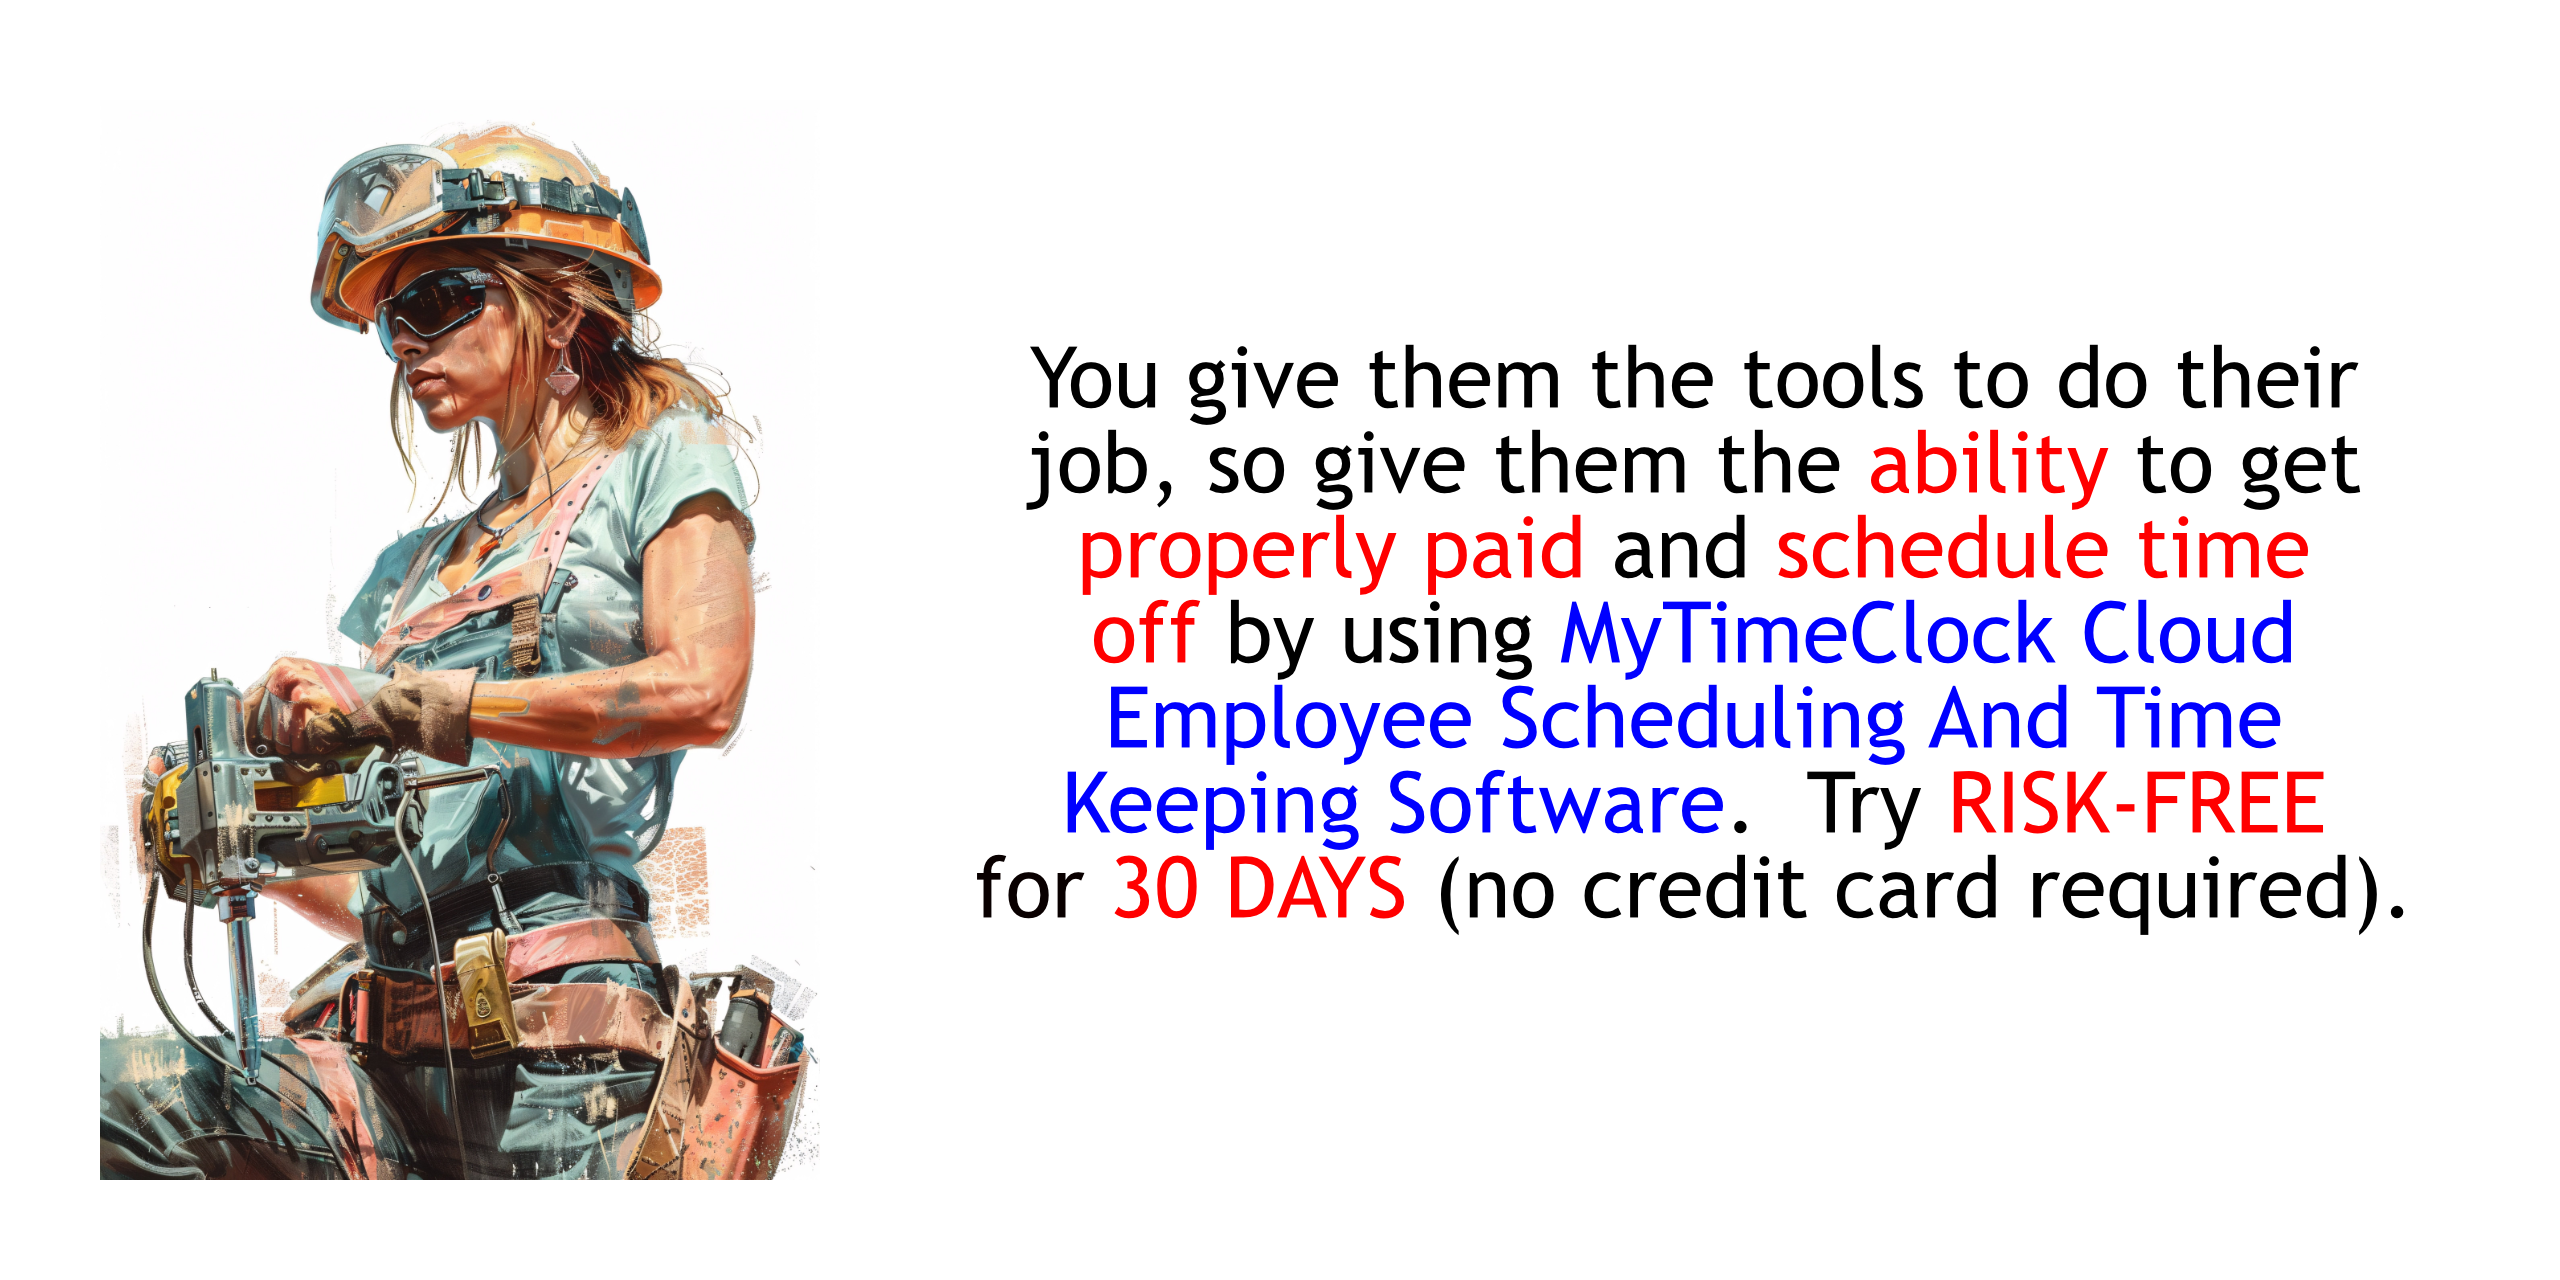 You give them the tools to do their job, so give them the ability to get properly paid and schedule time off by using MyTimeClock Cloud Employee Scheduling And Time Keeping Software.  Try RISK FREE FOR THIRTY (30) DAYS (NO CREDIT CARD REQUIRED; CANCELS AUTOMATICALLY IF YOU DO NOT SUBSCRIBE).